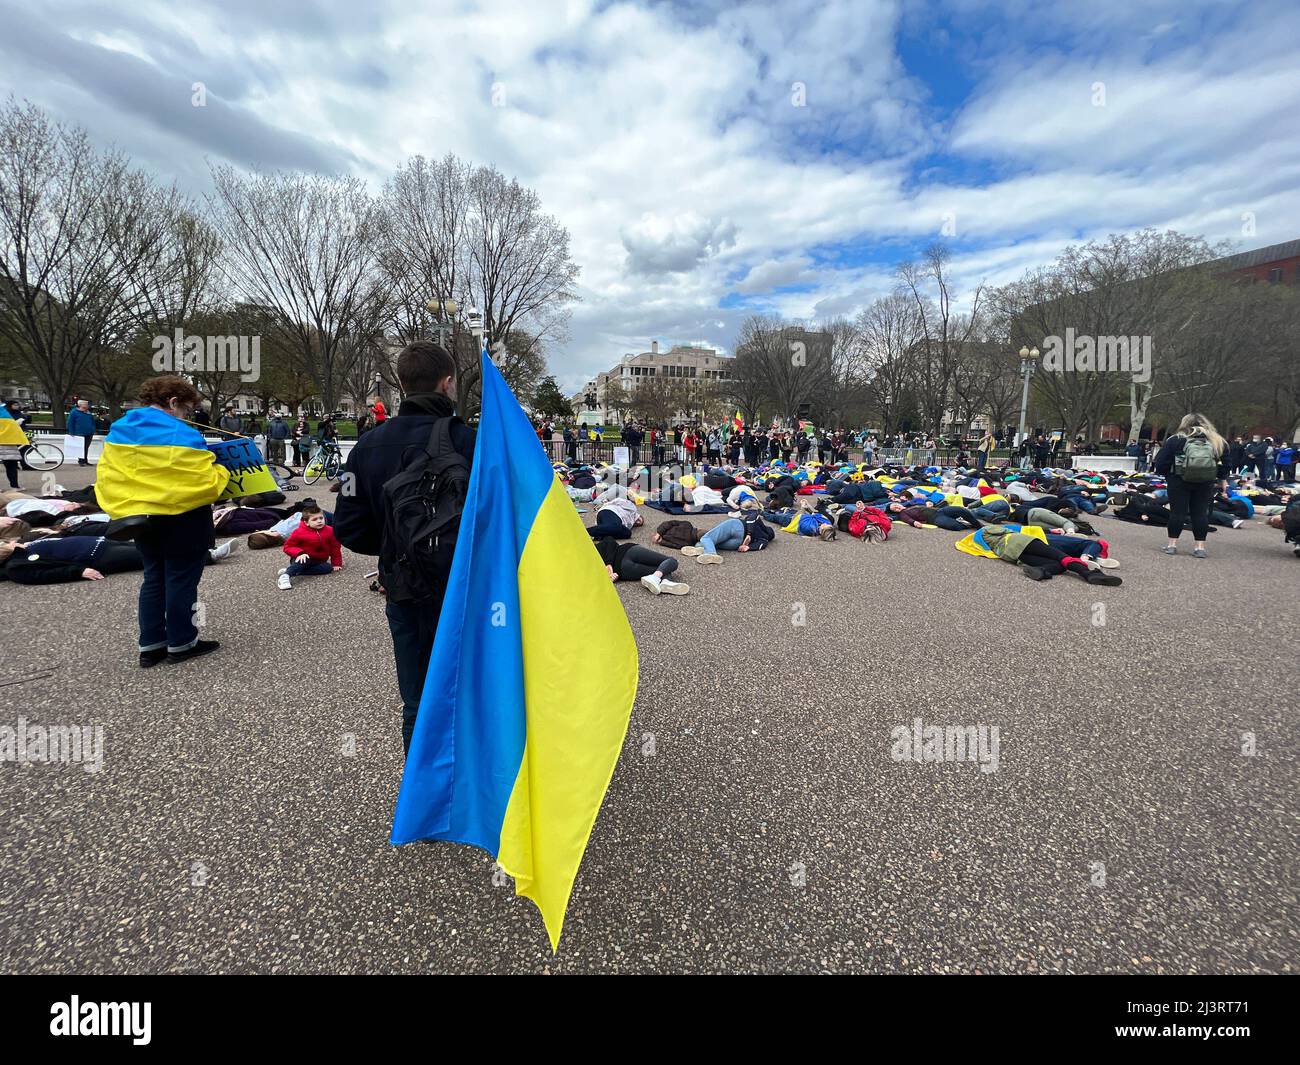 09 April 2022 Washington DC USA Supporters for Ukraine stage demonstration in front of The White house lying on the ground to simulate the dead as names of the dead were dead a!oud. Stock Photo